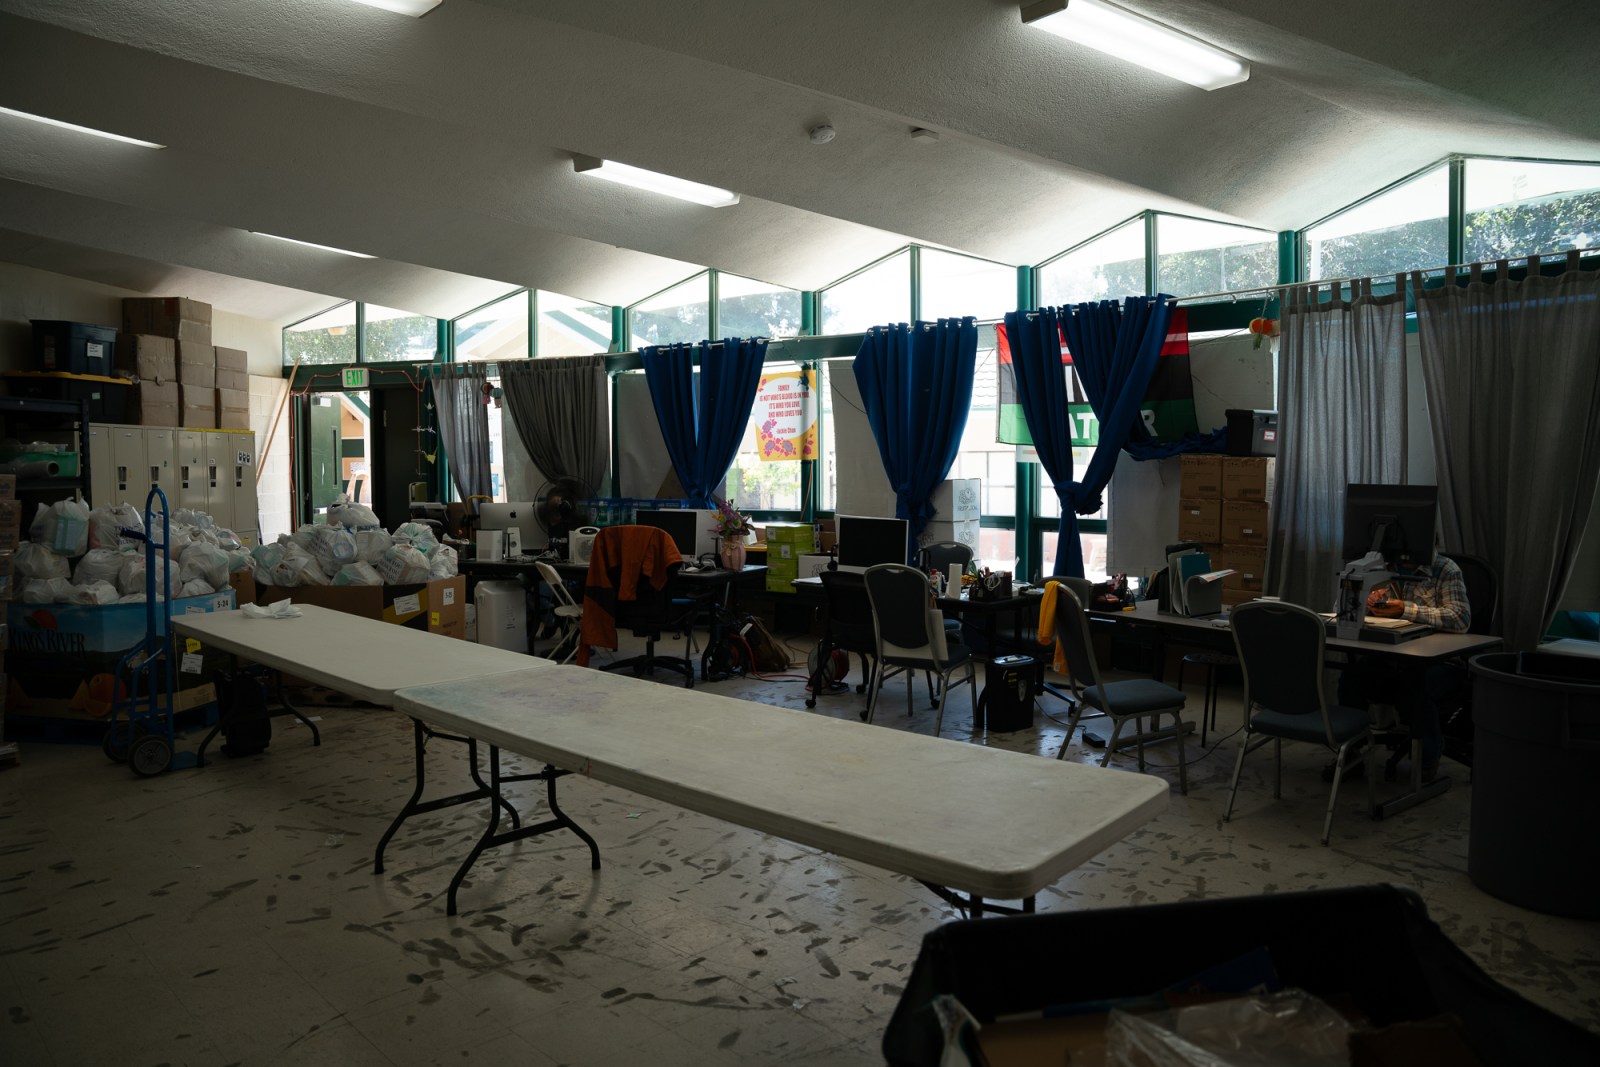 A dimly lit room has a row of desks with computers, worn floors, a long empty folding table, and piles of full, plastic bags. 